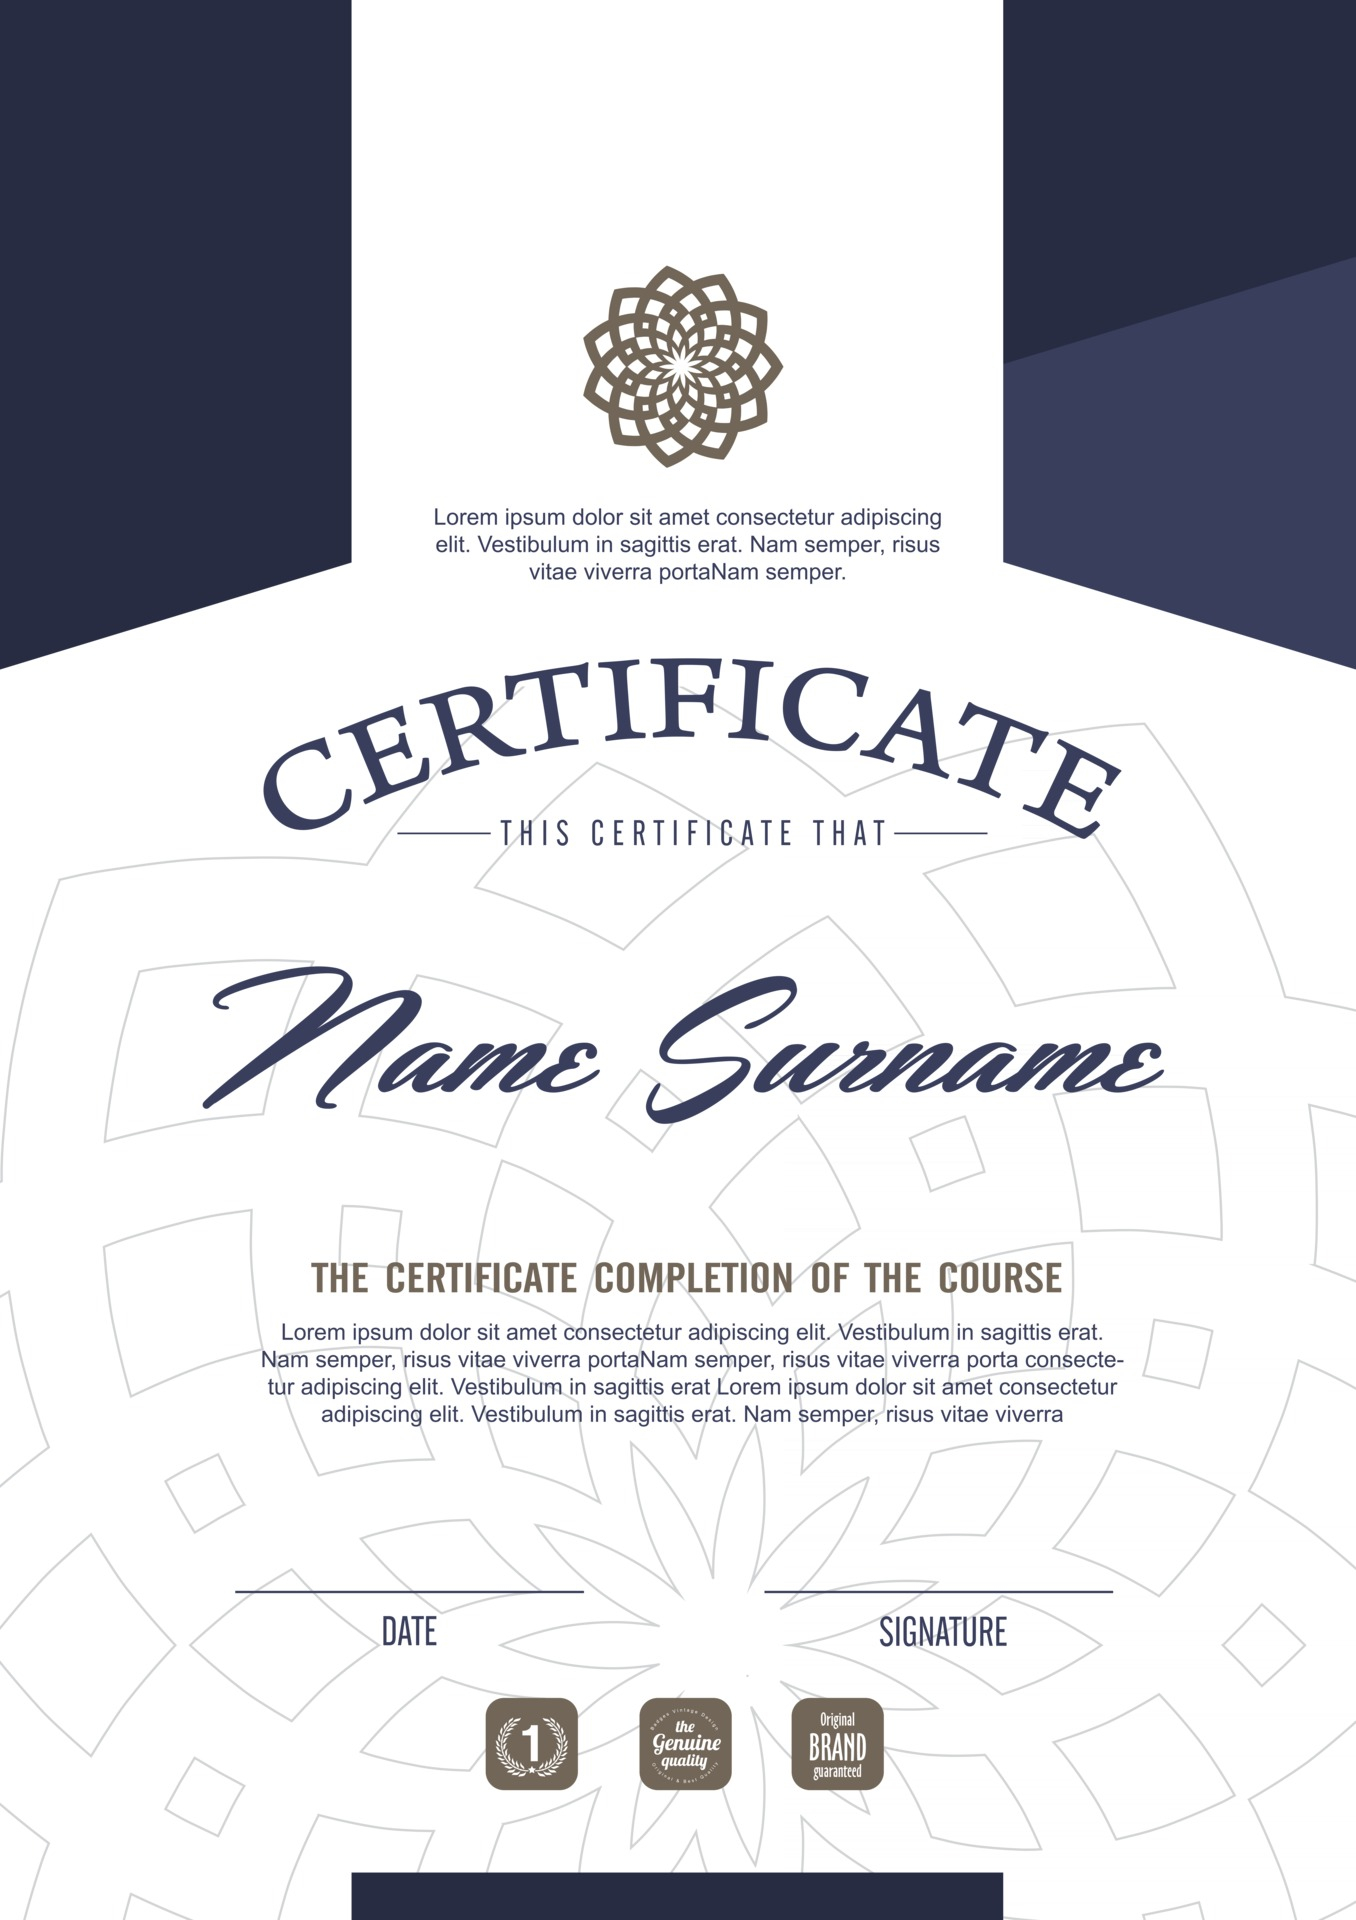 Qualification Certificate Template With Elegant Design 10  Pertaining To Qualification Certificate Template